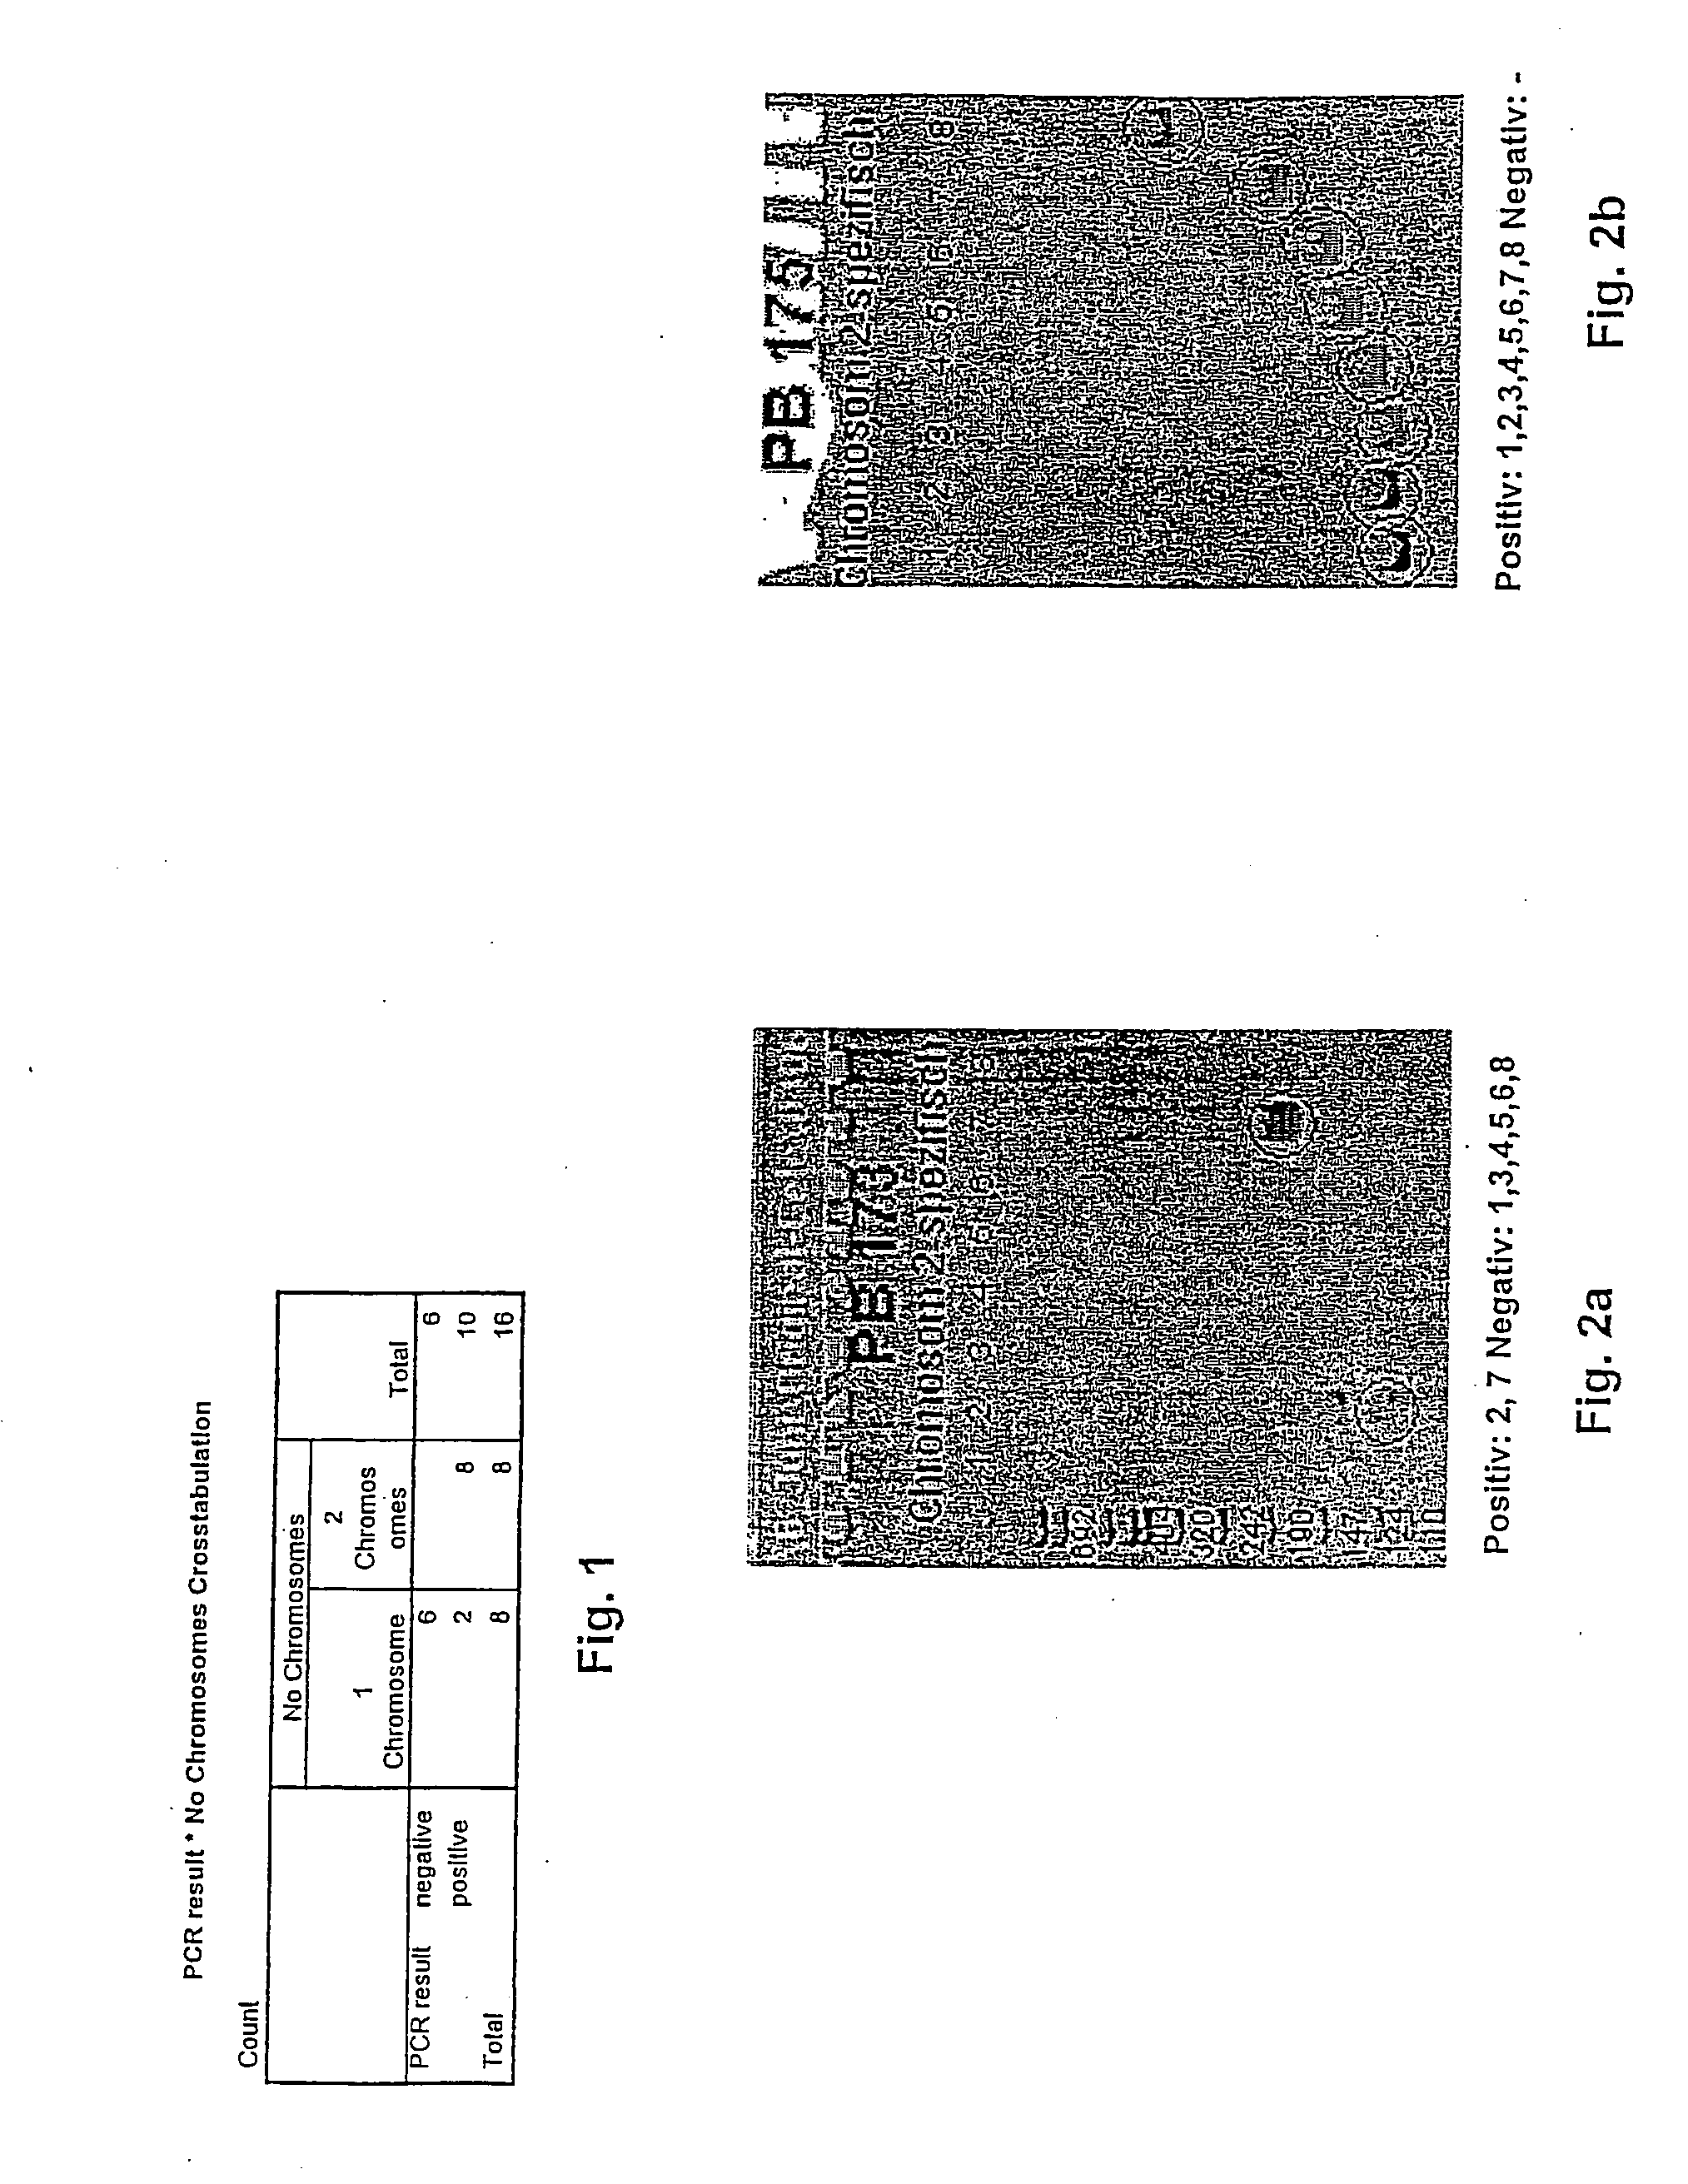 Method for Determining the Abundance of Sequences in a Sample